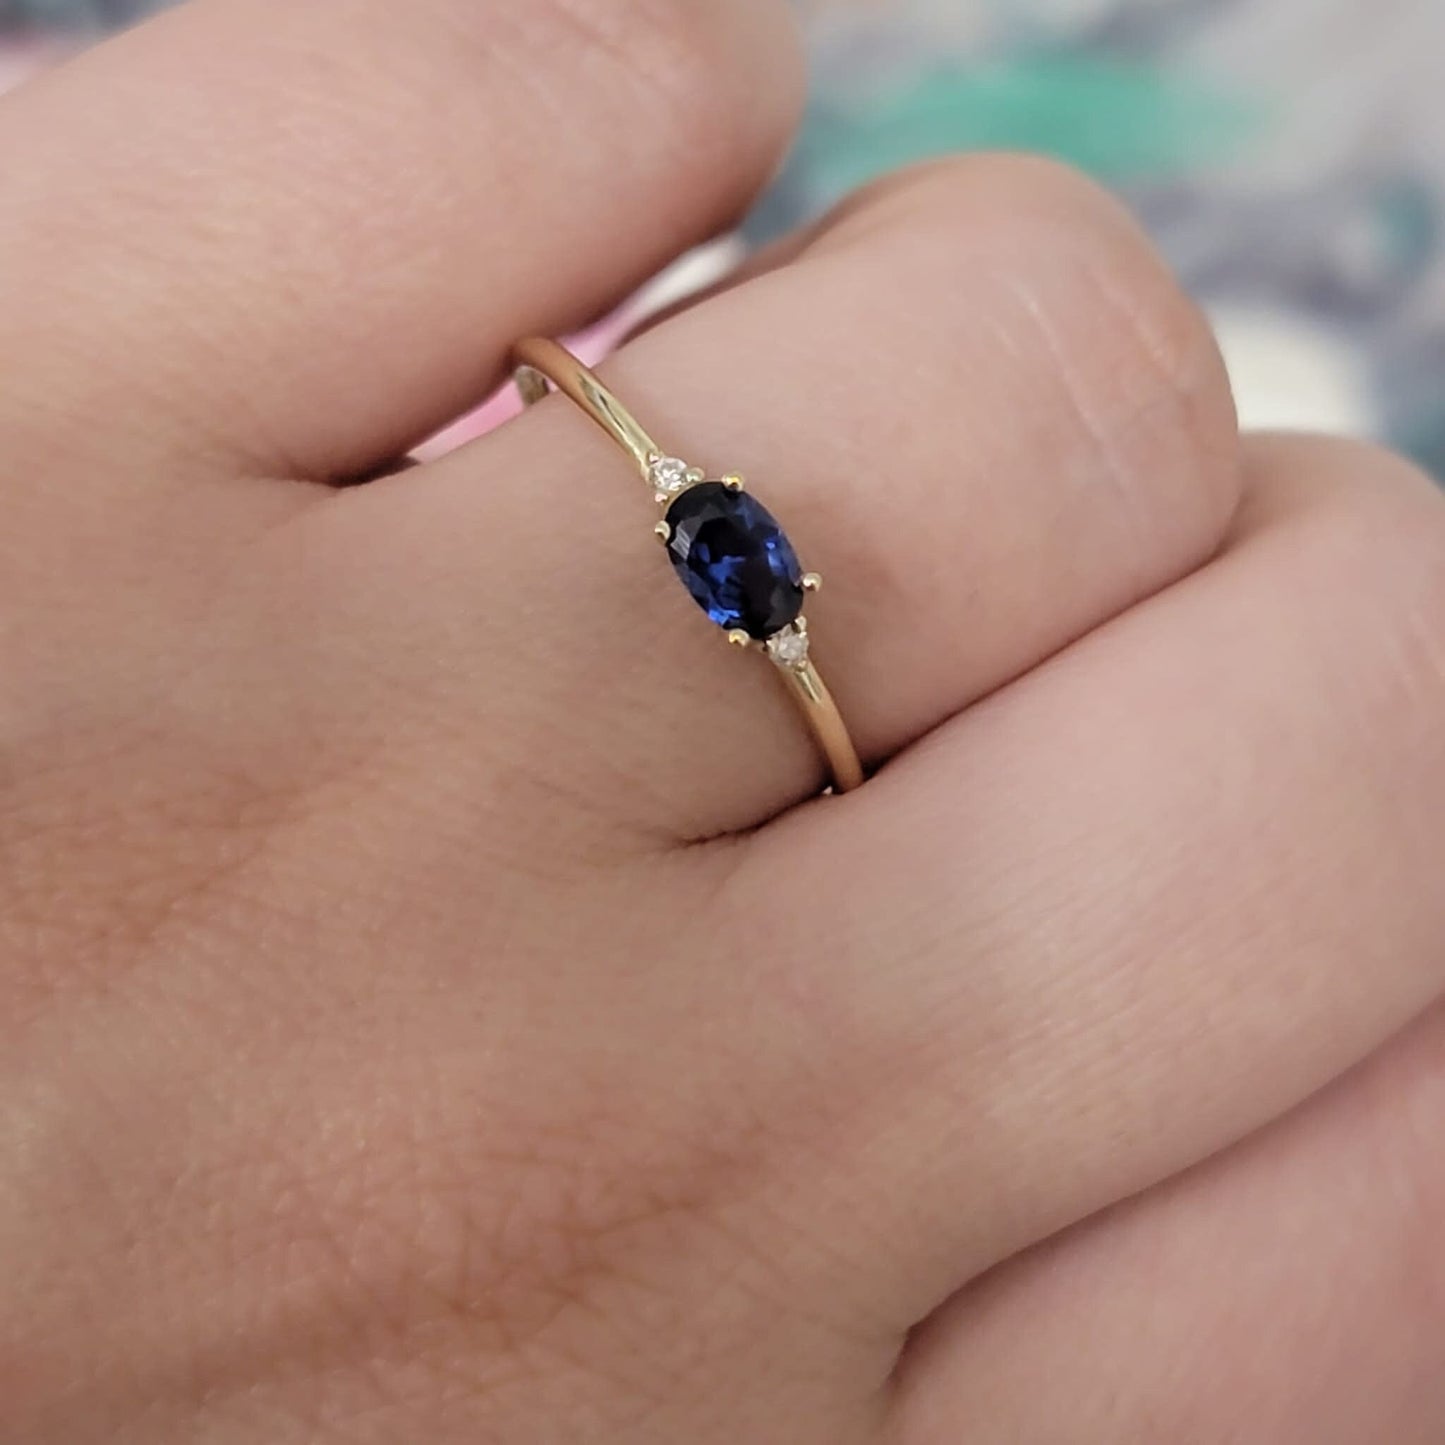 Oval Cut Blue Sapphire And Diamond Engagement Ring, 14K Vintage Solitaire Sapphire Ring, Three Stone Engagement Ring, Anniversary Gift